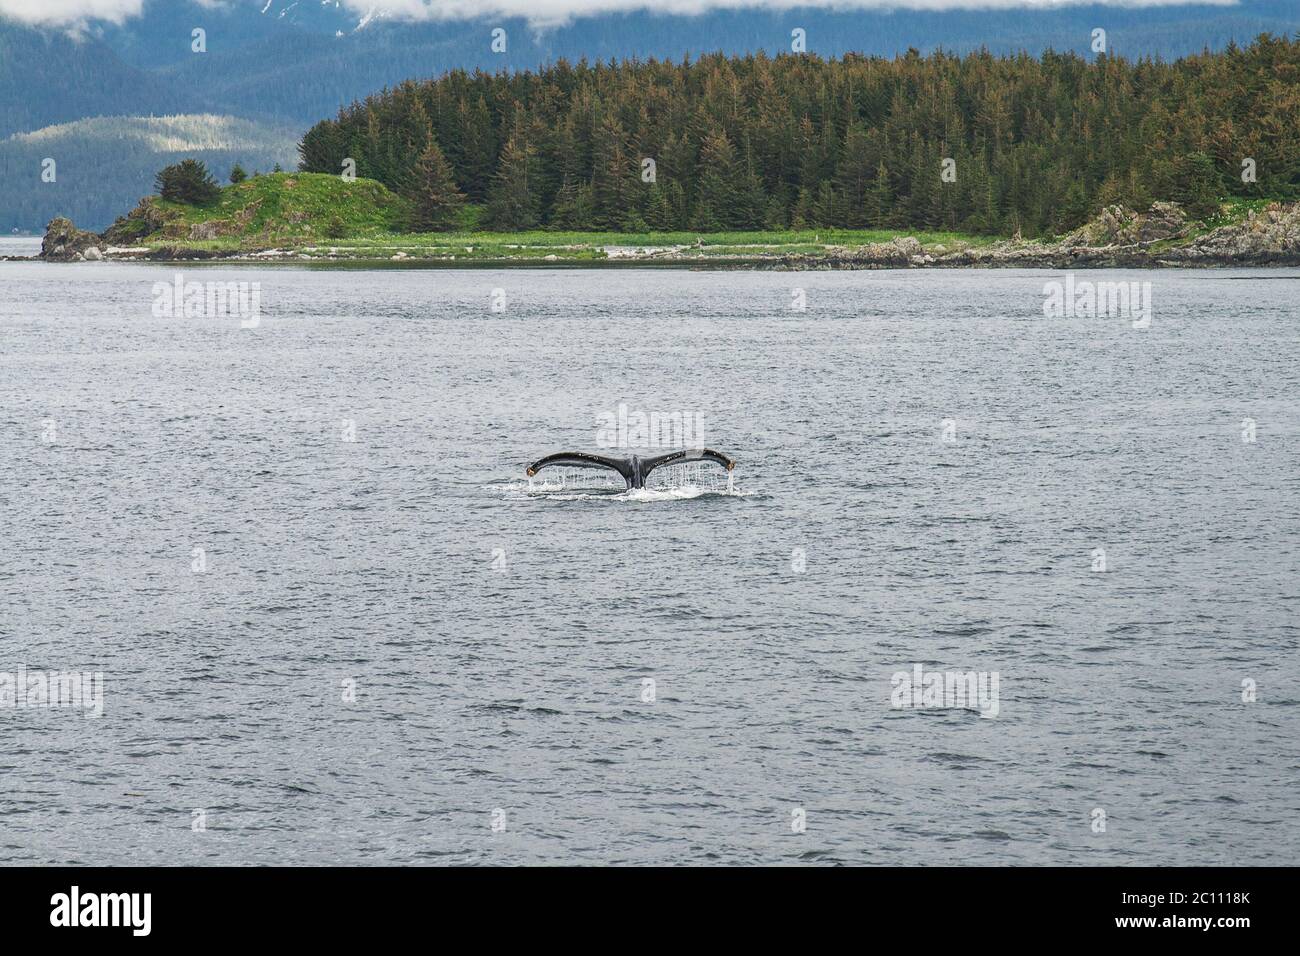 Humpback Whale Diving in front of the Trees in Alaska Stock Photo